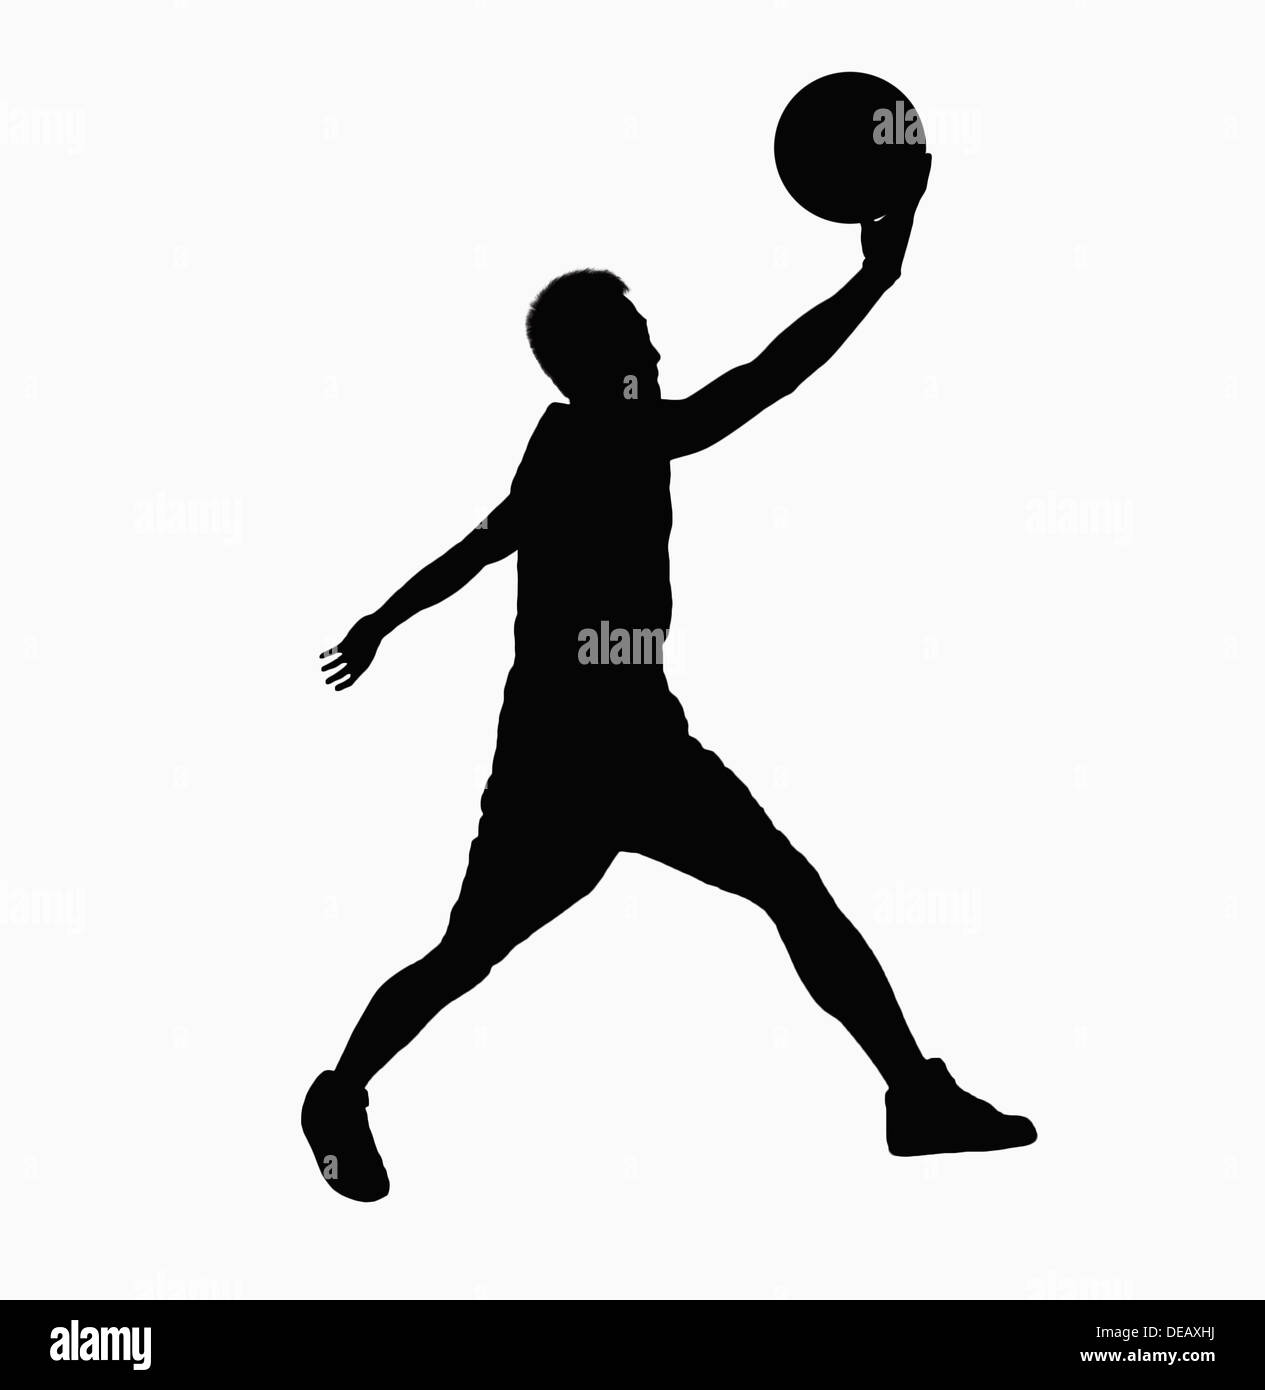 Silhouette of basketball player jumping with ball Stockfoto ...